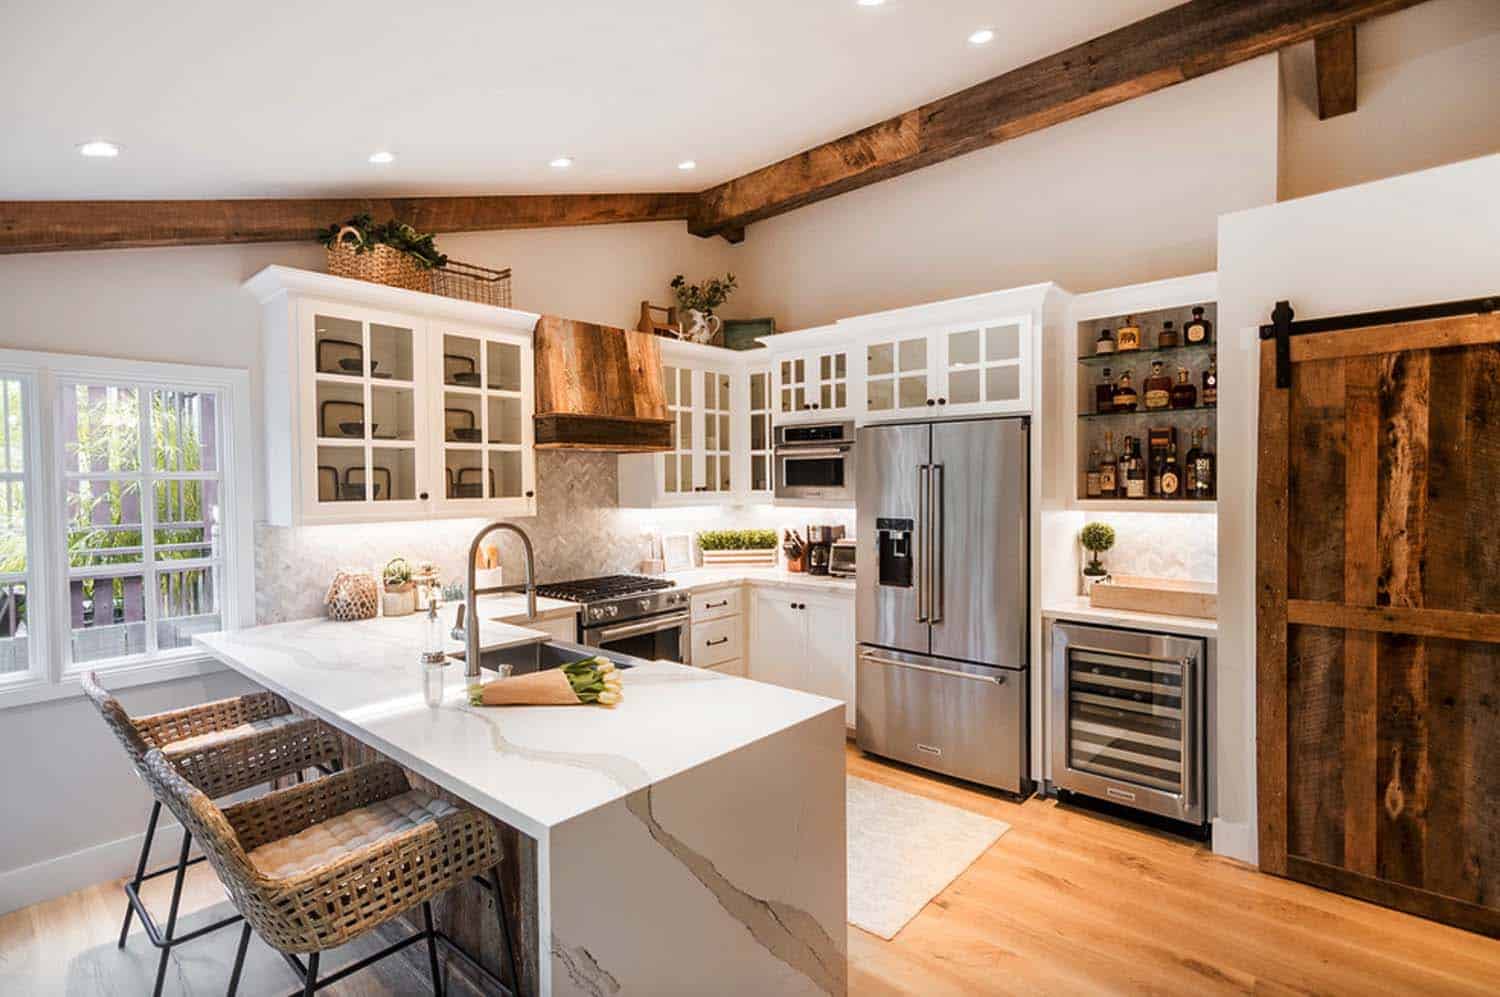 White Kitchen in Rustic Style